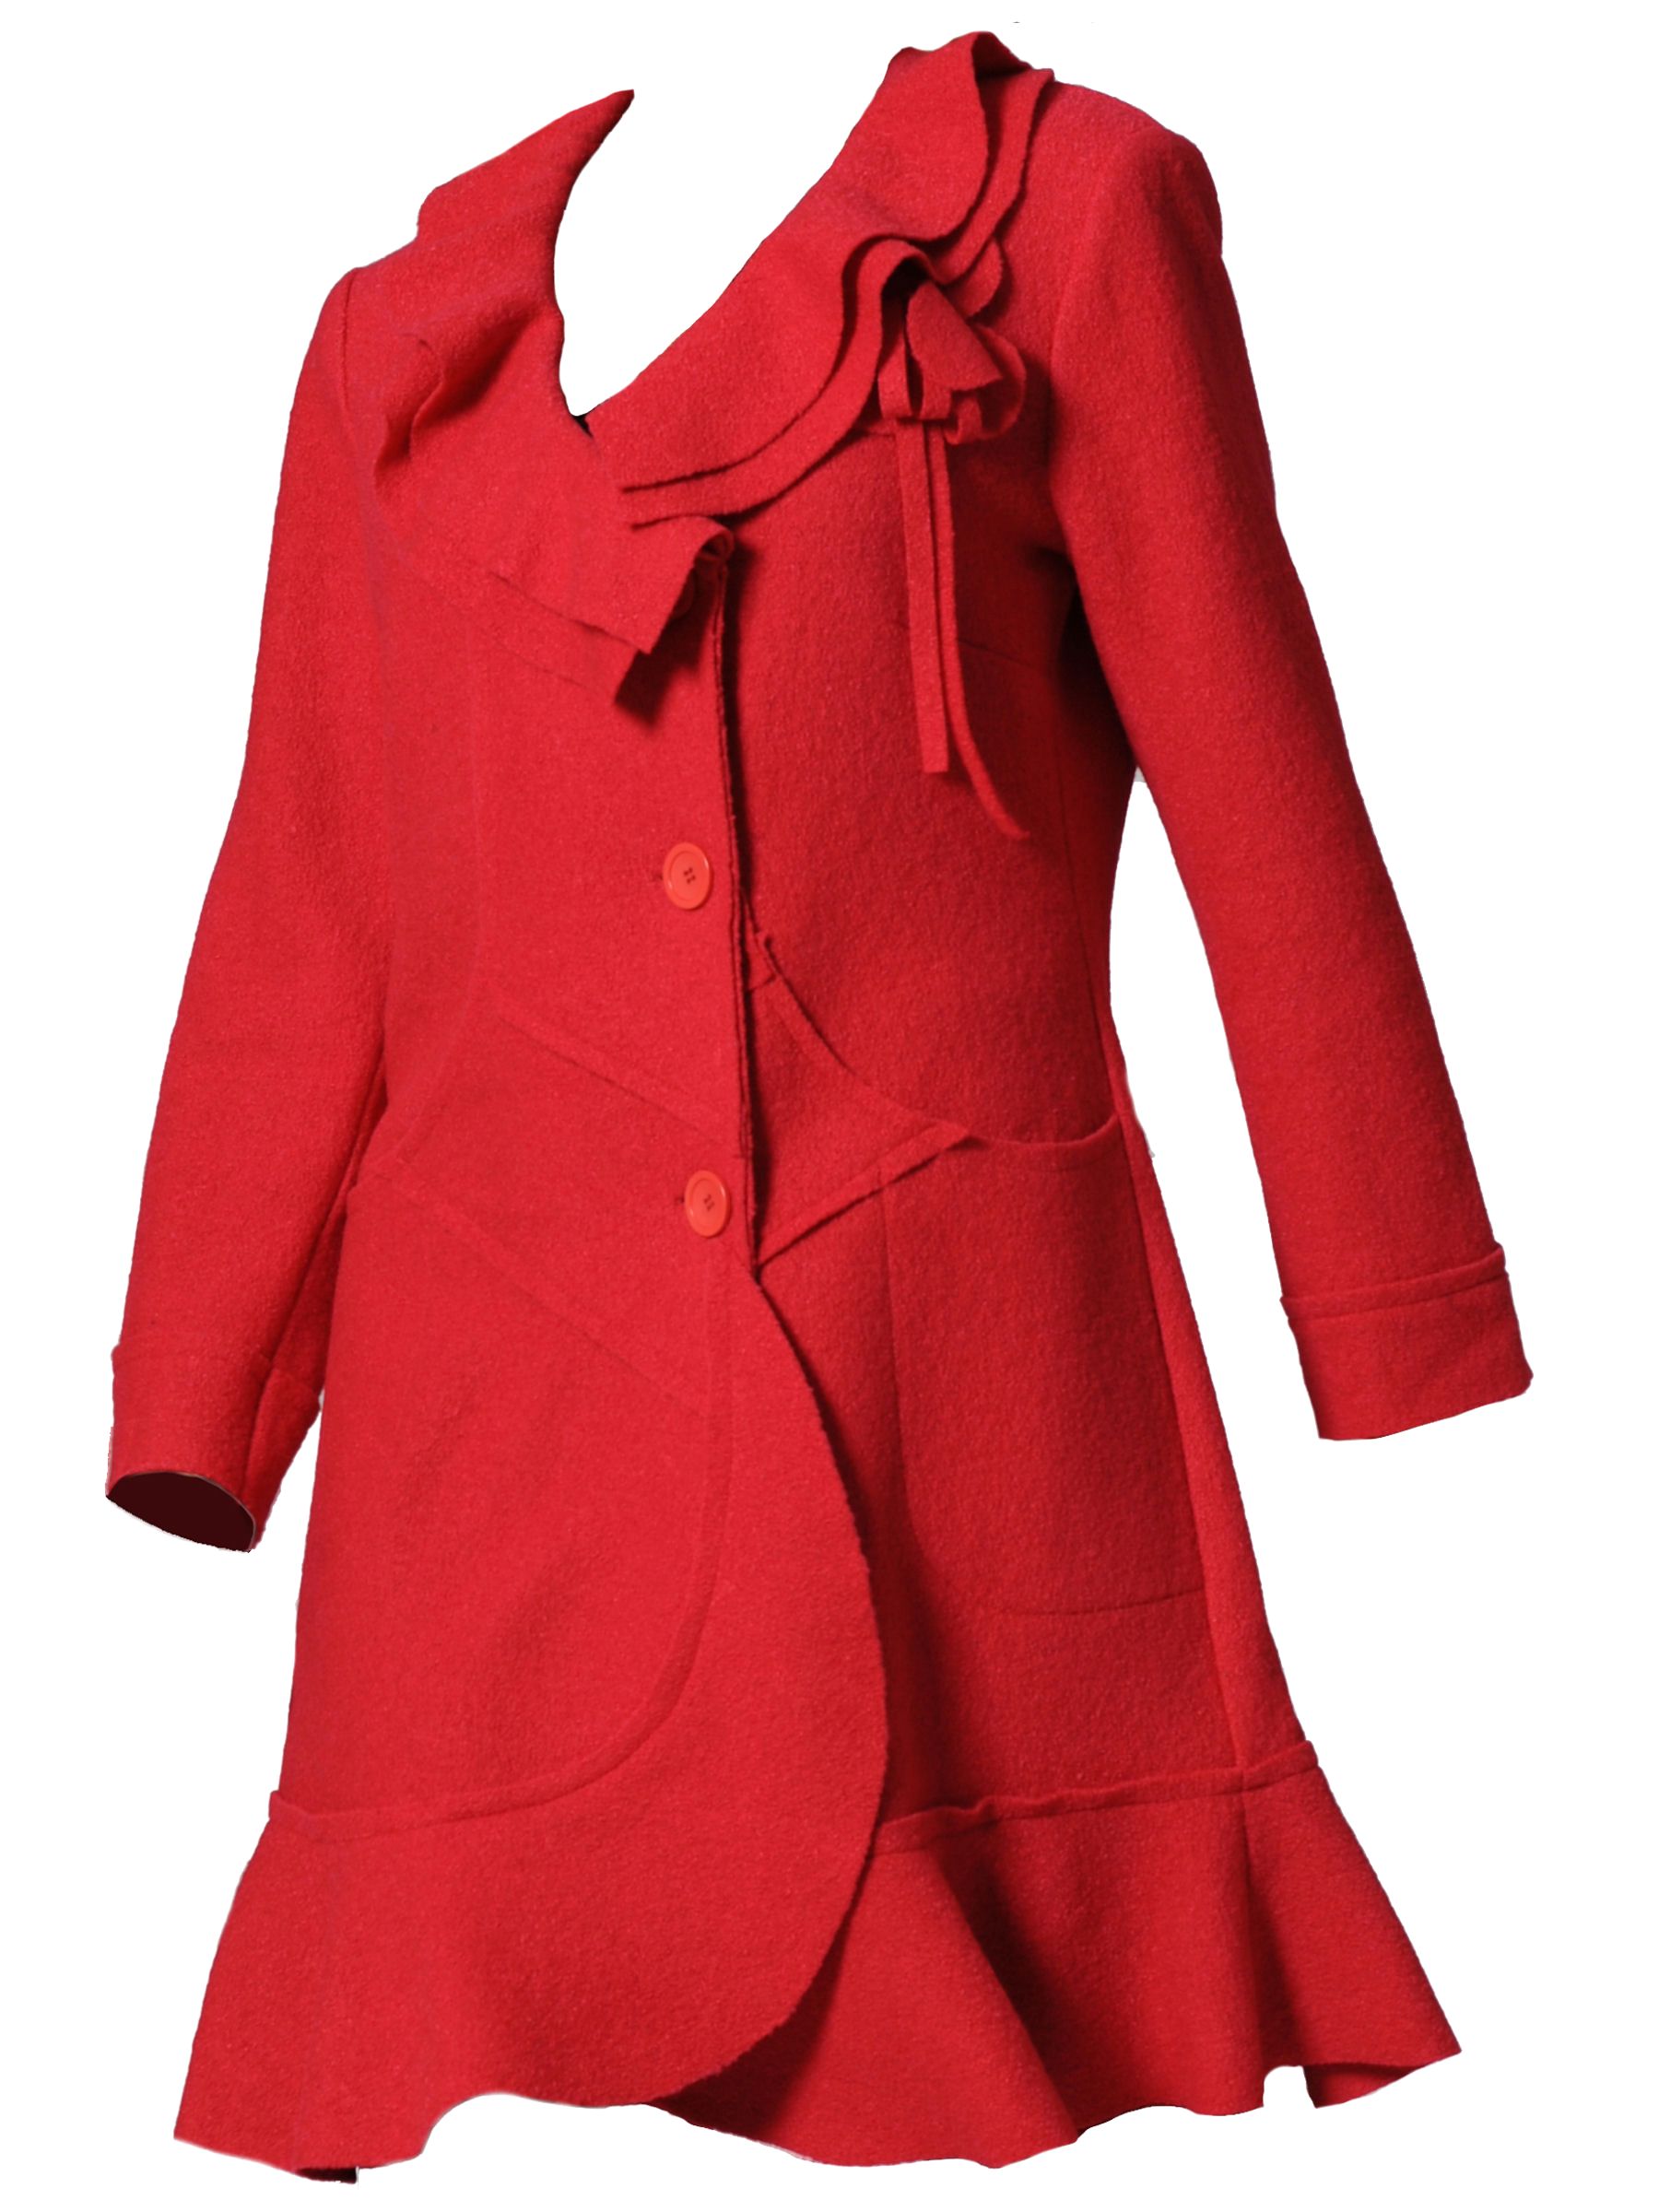 Chesca Double Collar Boiled Wool Mix Coat, Red at John Lewis